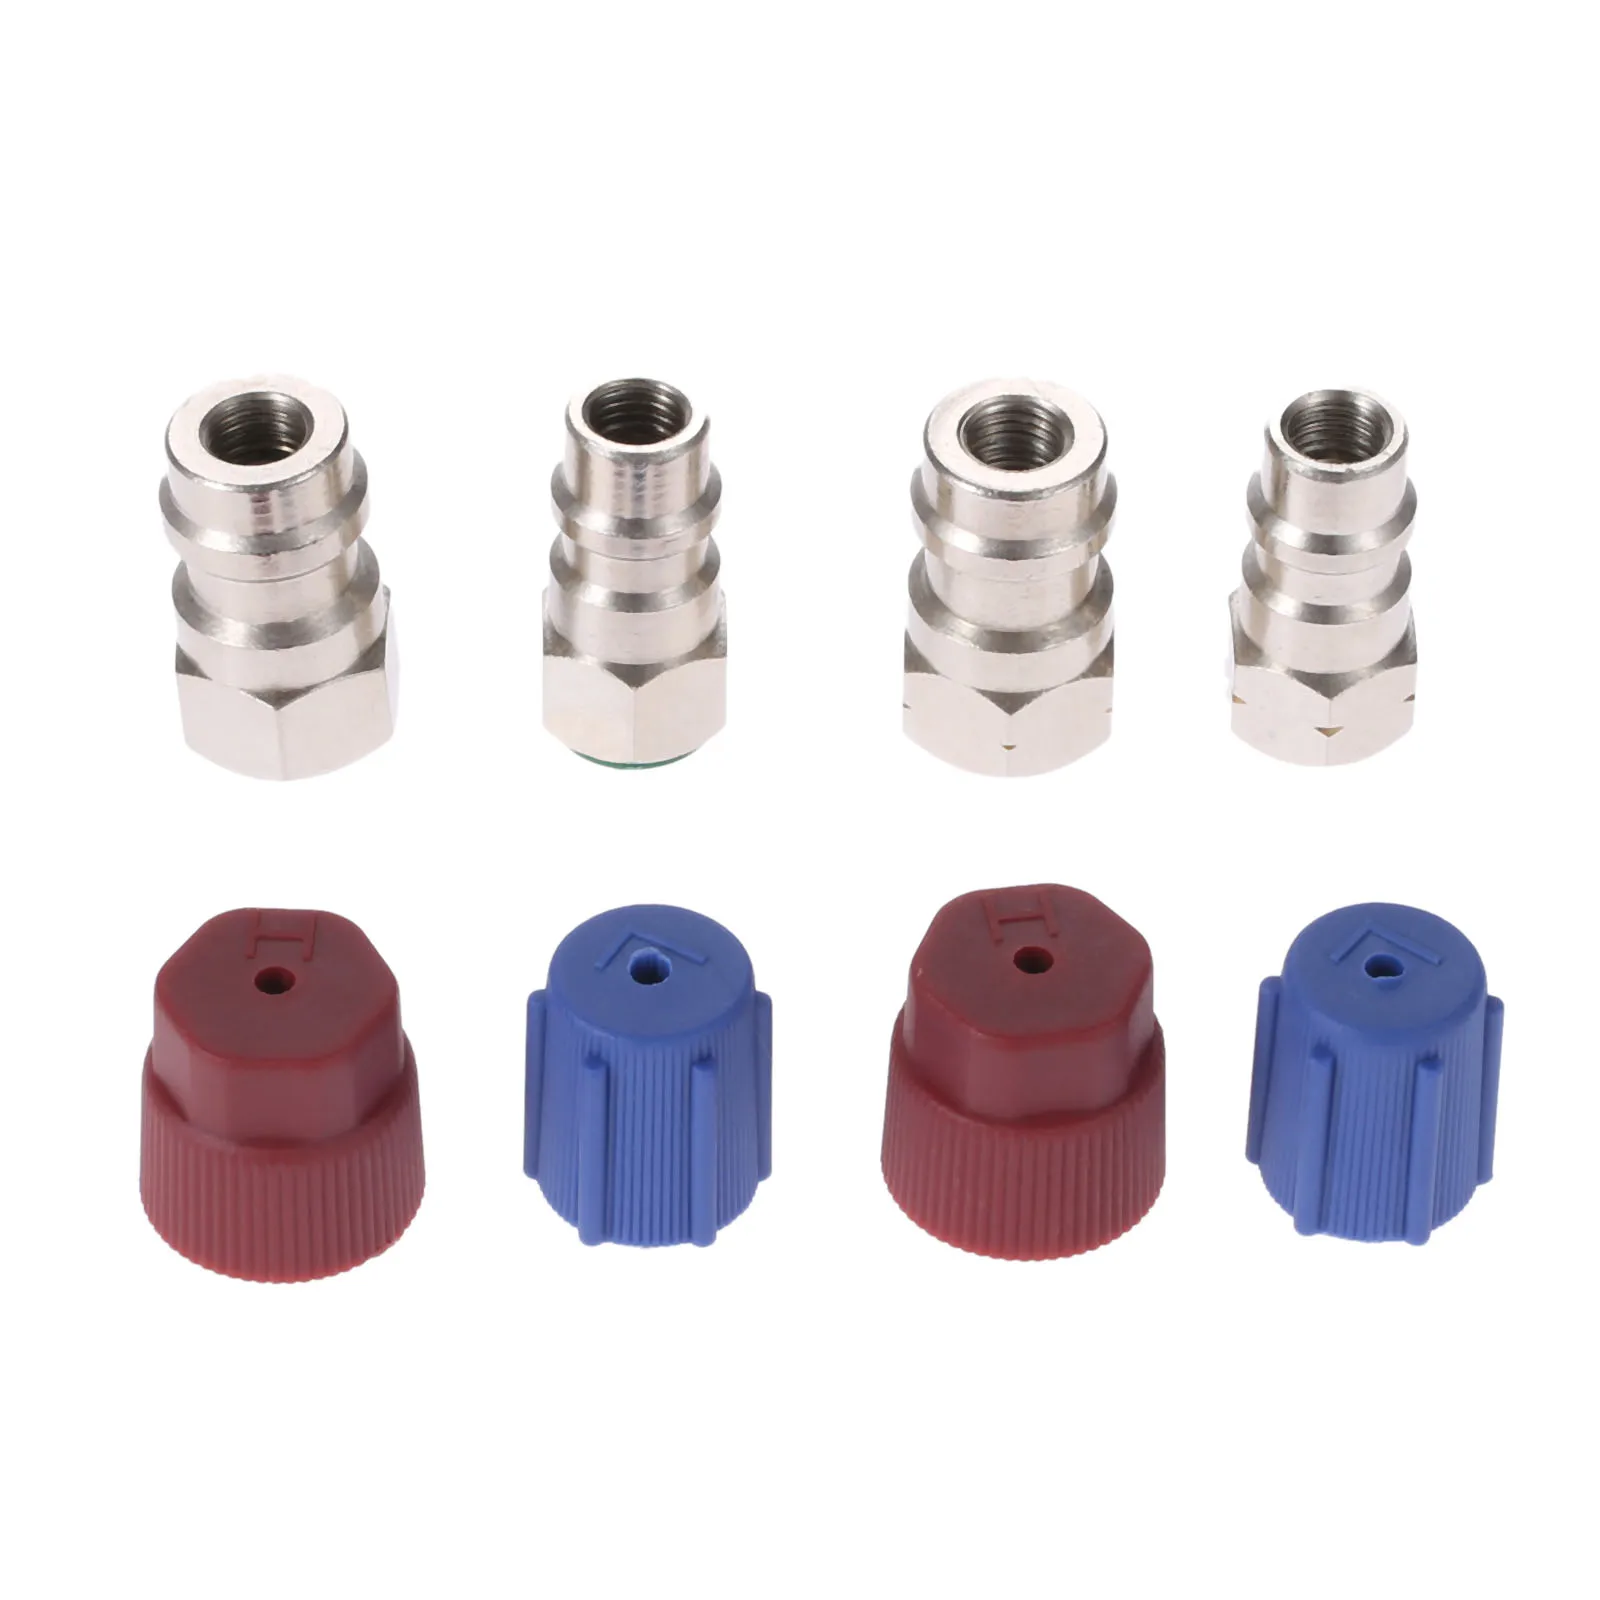 

Straight Adapters w/ Valve Core & Service Port Caps AC R12 R22 To R134a Retrofit Parts Kit Conversion Adapter Valve Fitting